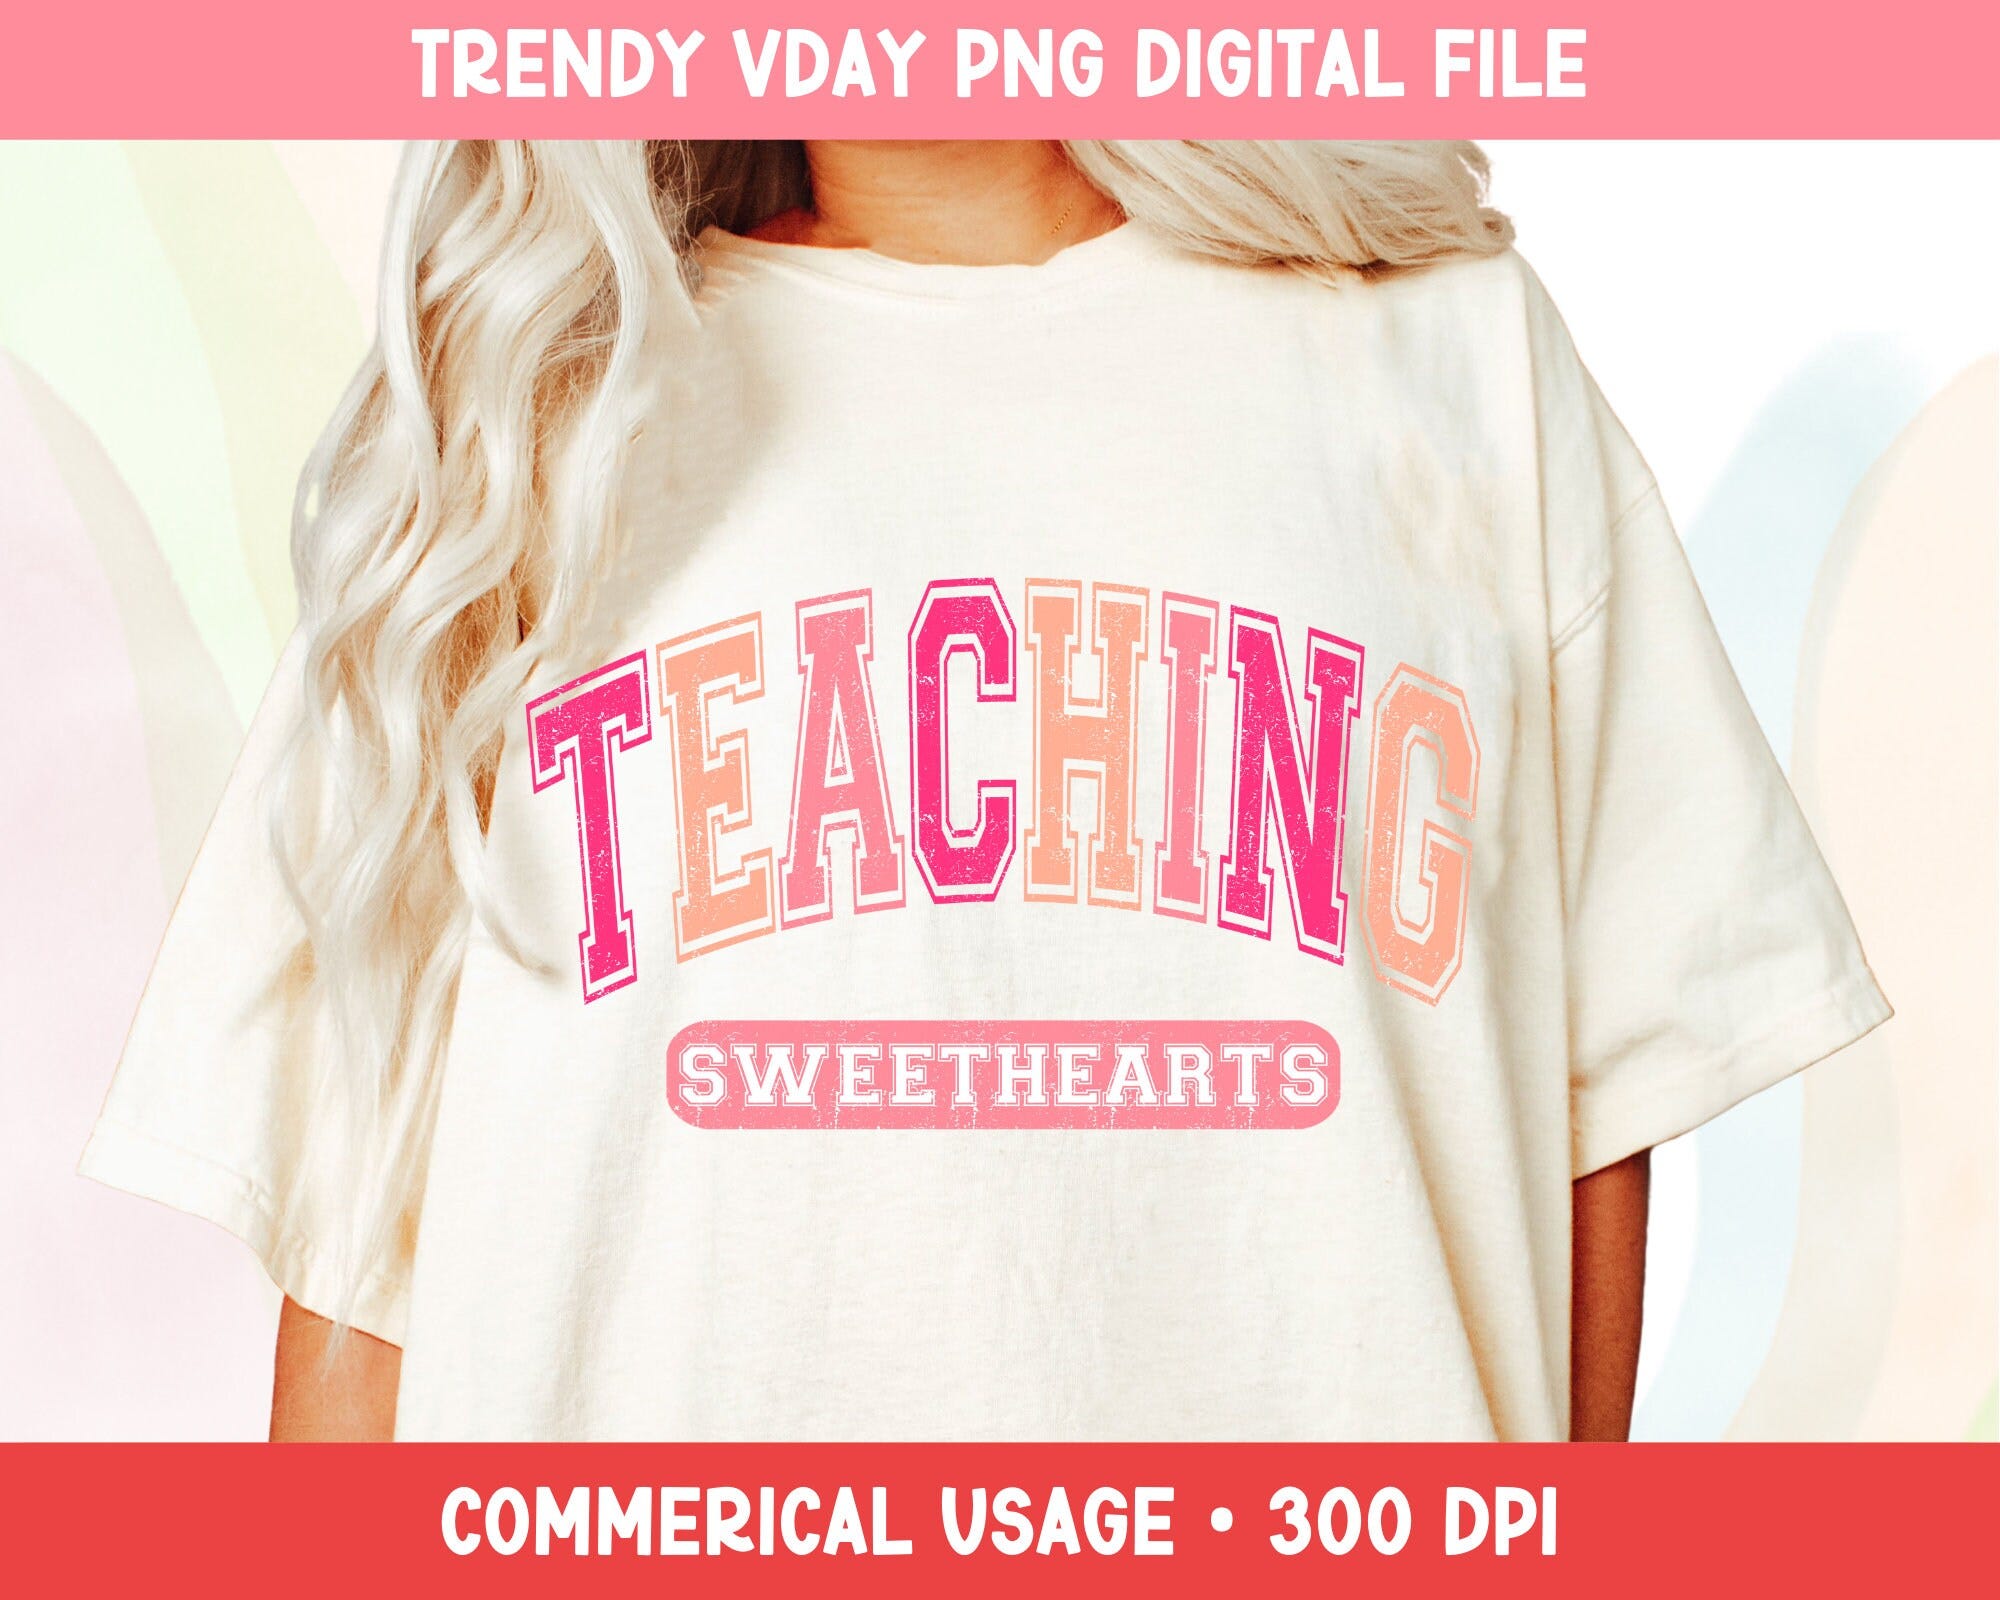 Retro Teaching Sweethearts PNG, Varsity Arched College Design Teacher Groovy Valentines Day T Shirt Sublimation Digital Design Download 85